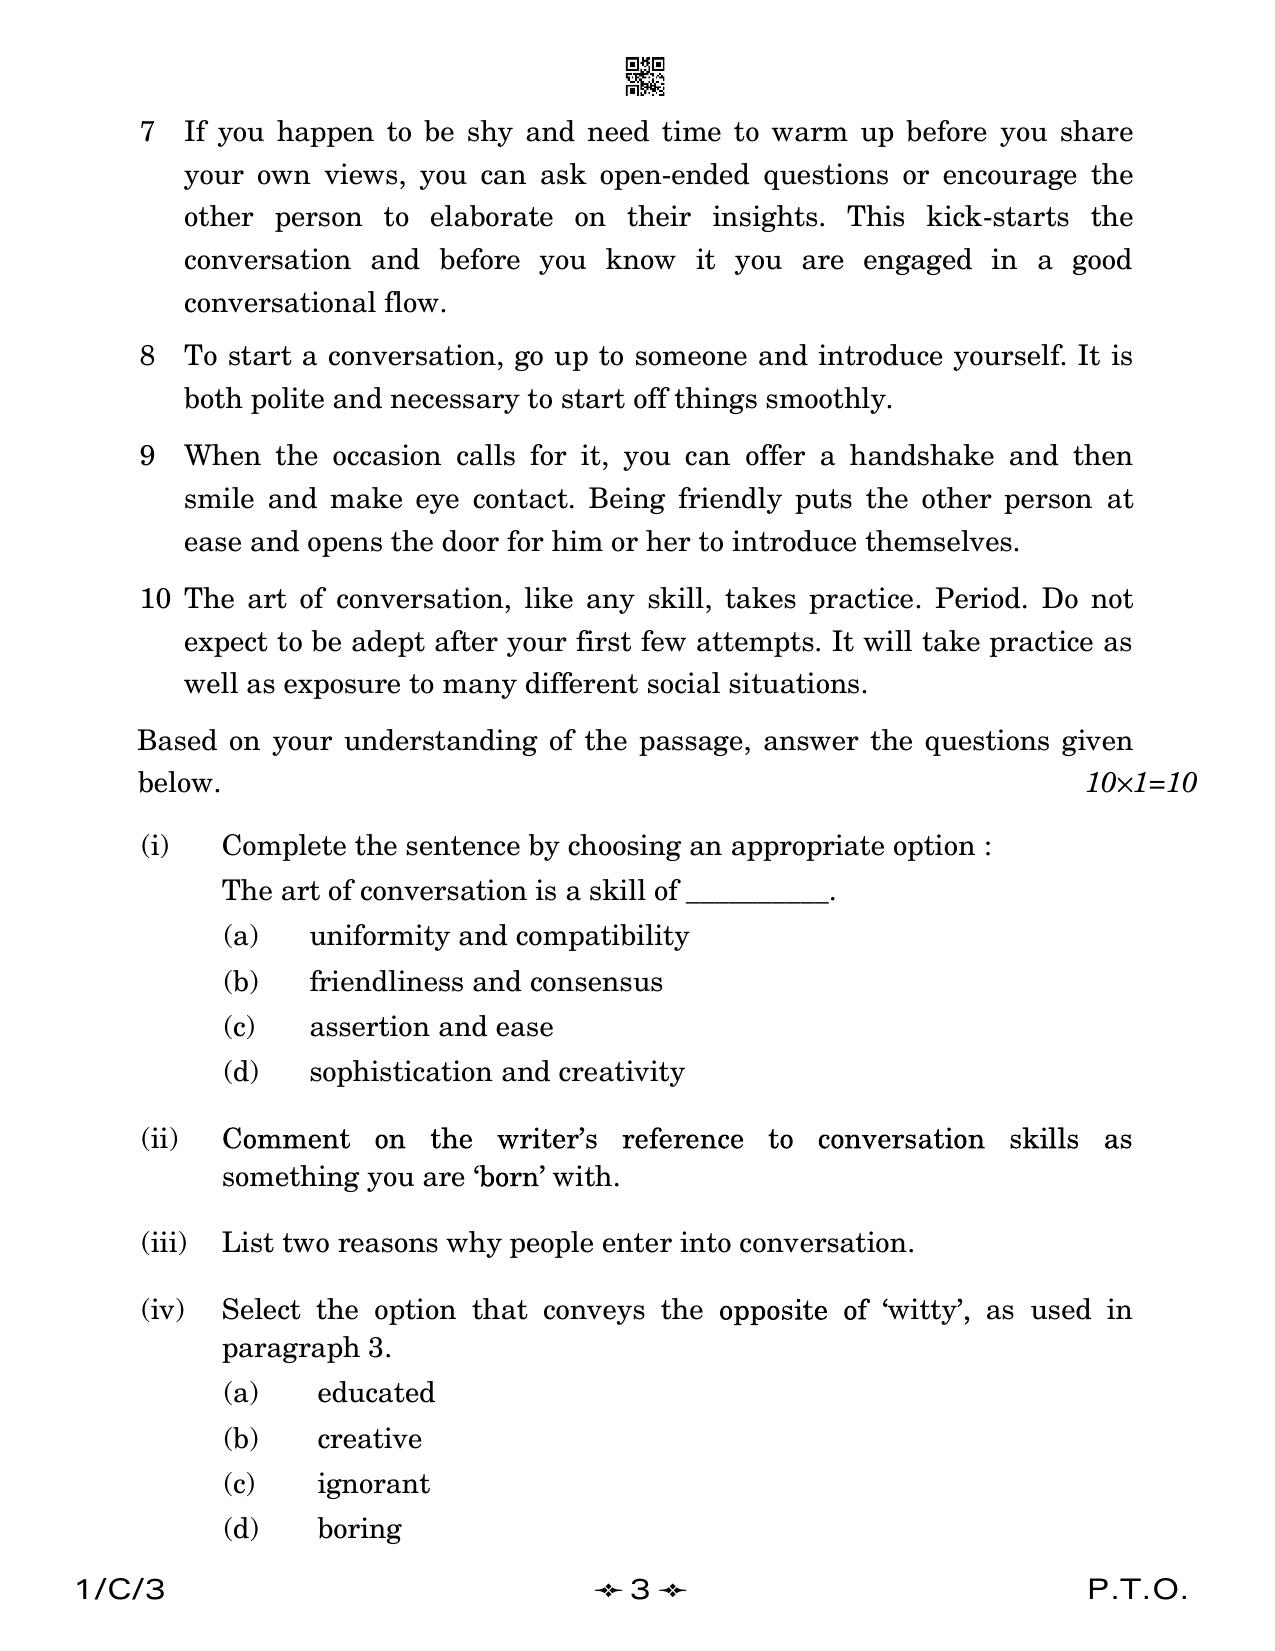 CBSE Class 12 1-3 English Core 2023 (Compartment) Question Paper - Page 3